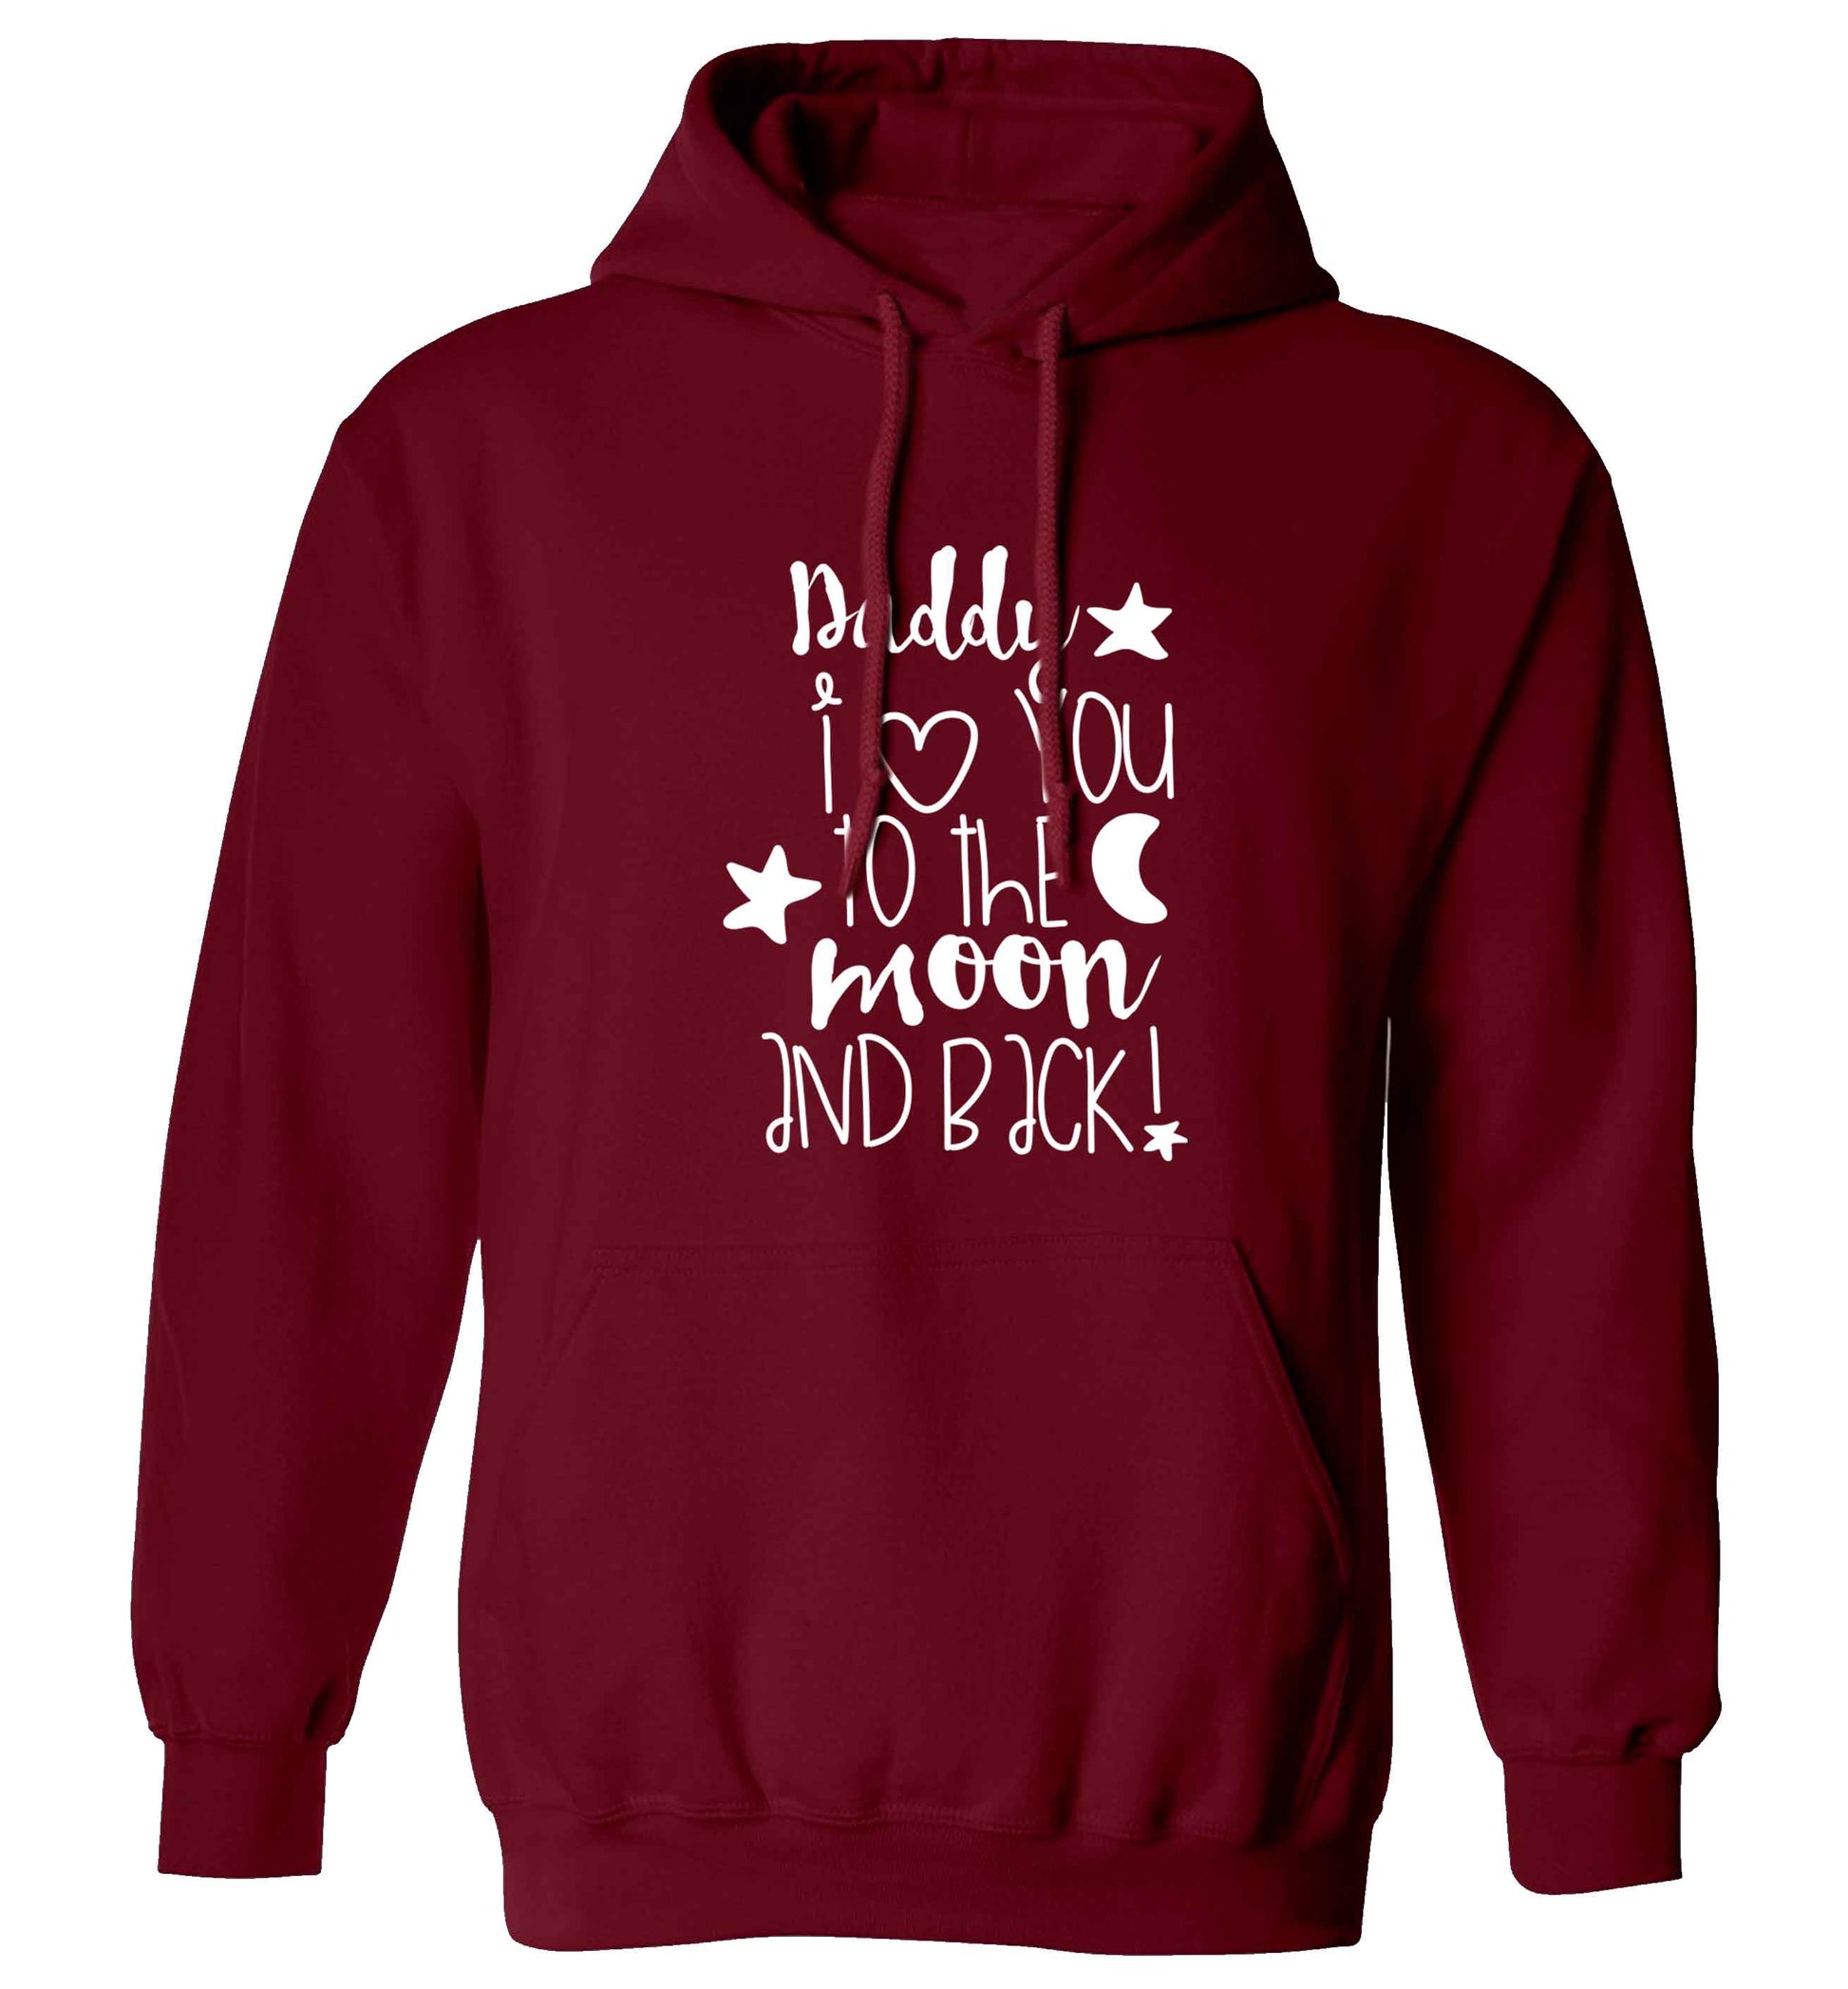 Daddy I love you to the moon and back adults unisex maroon hoodie 2XL